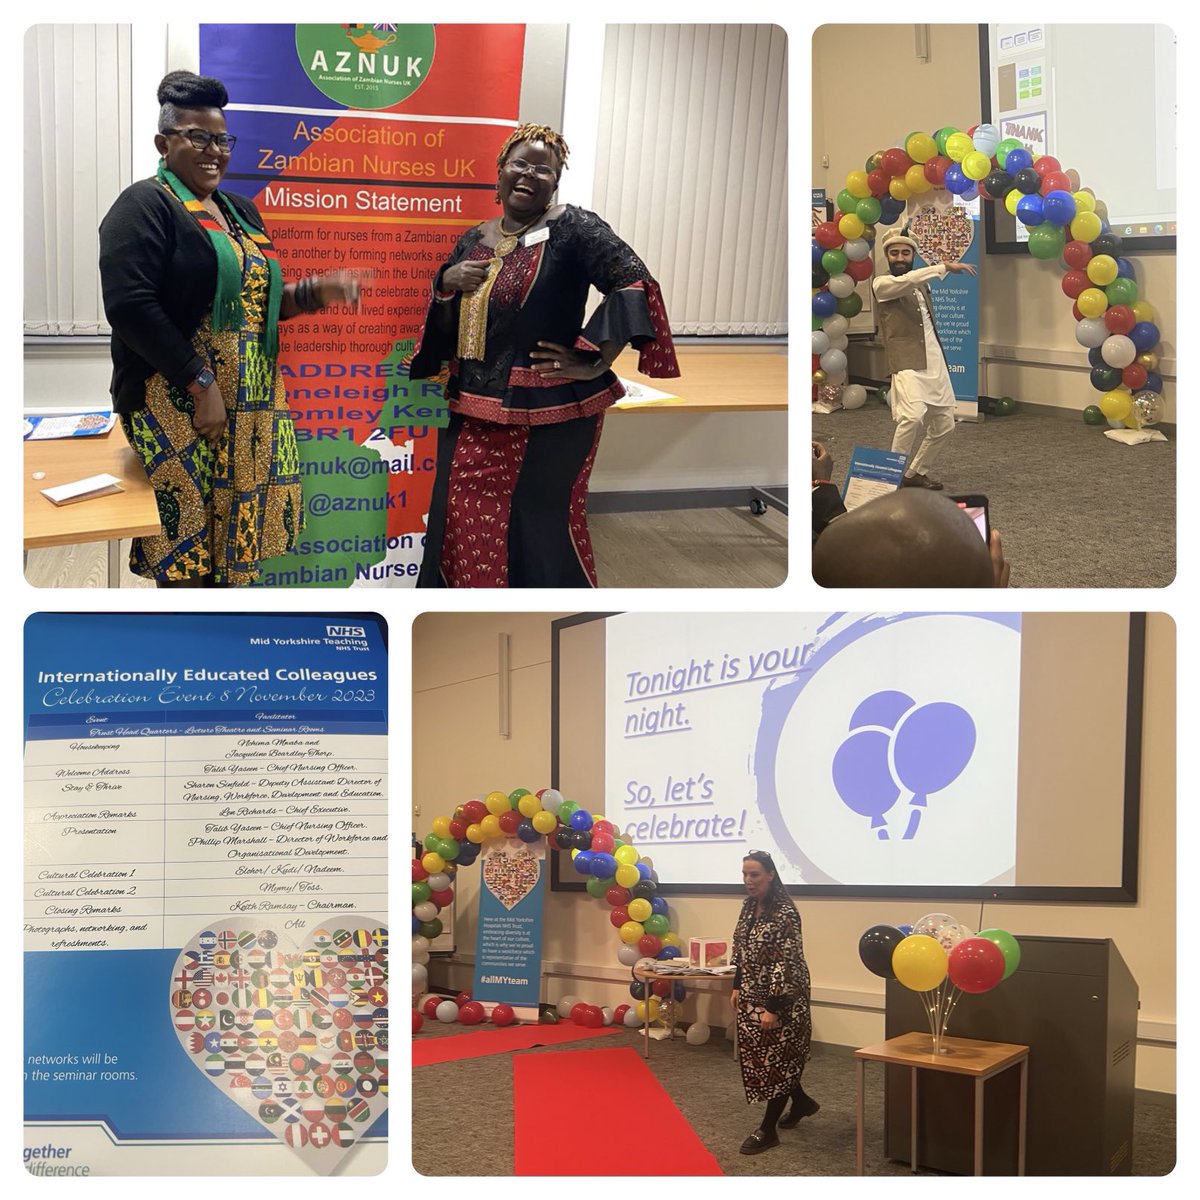 Congratulations to mid Yorkshire Trust for the wonderful celebration of Internationally Educated colleagues #stayandthrive #AZNUK  compassionate leadership with cultural intelligence at heart ⁦@nchimamc⁩ ⁦@ChrisKapopo⁩ ⁦@ElitaMPhiri⁩ ⁦@heyyyalllove⁩